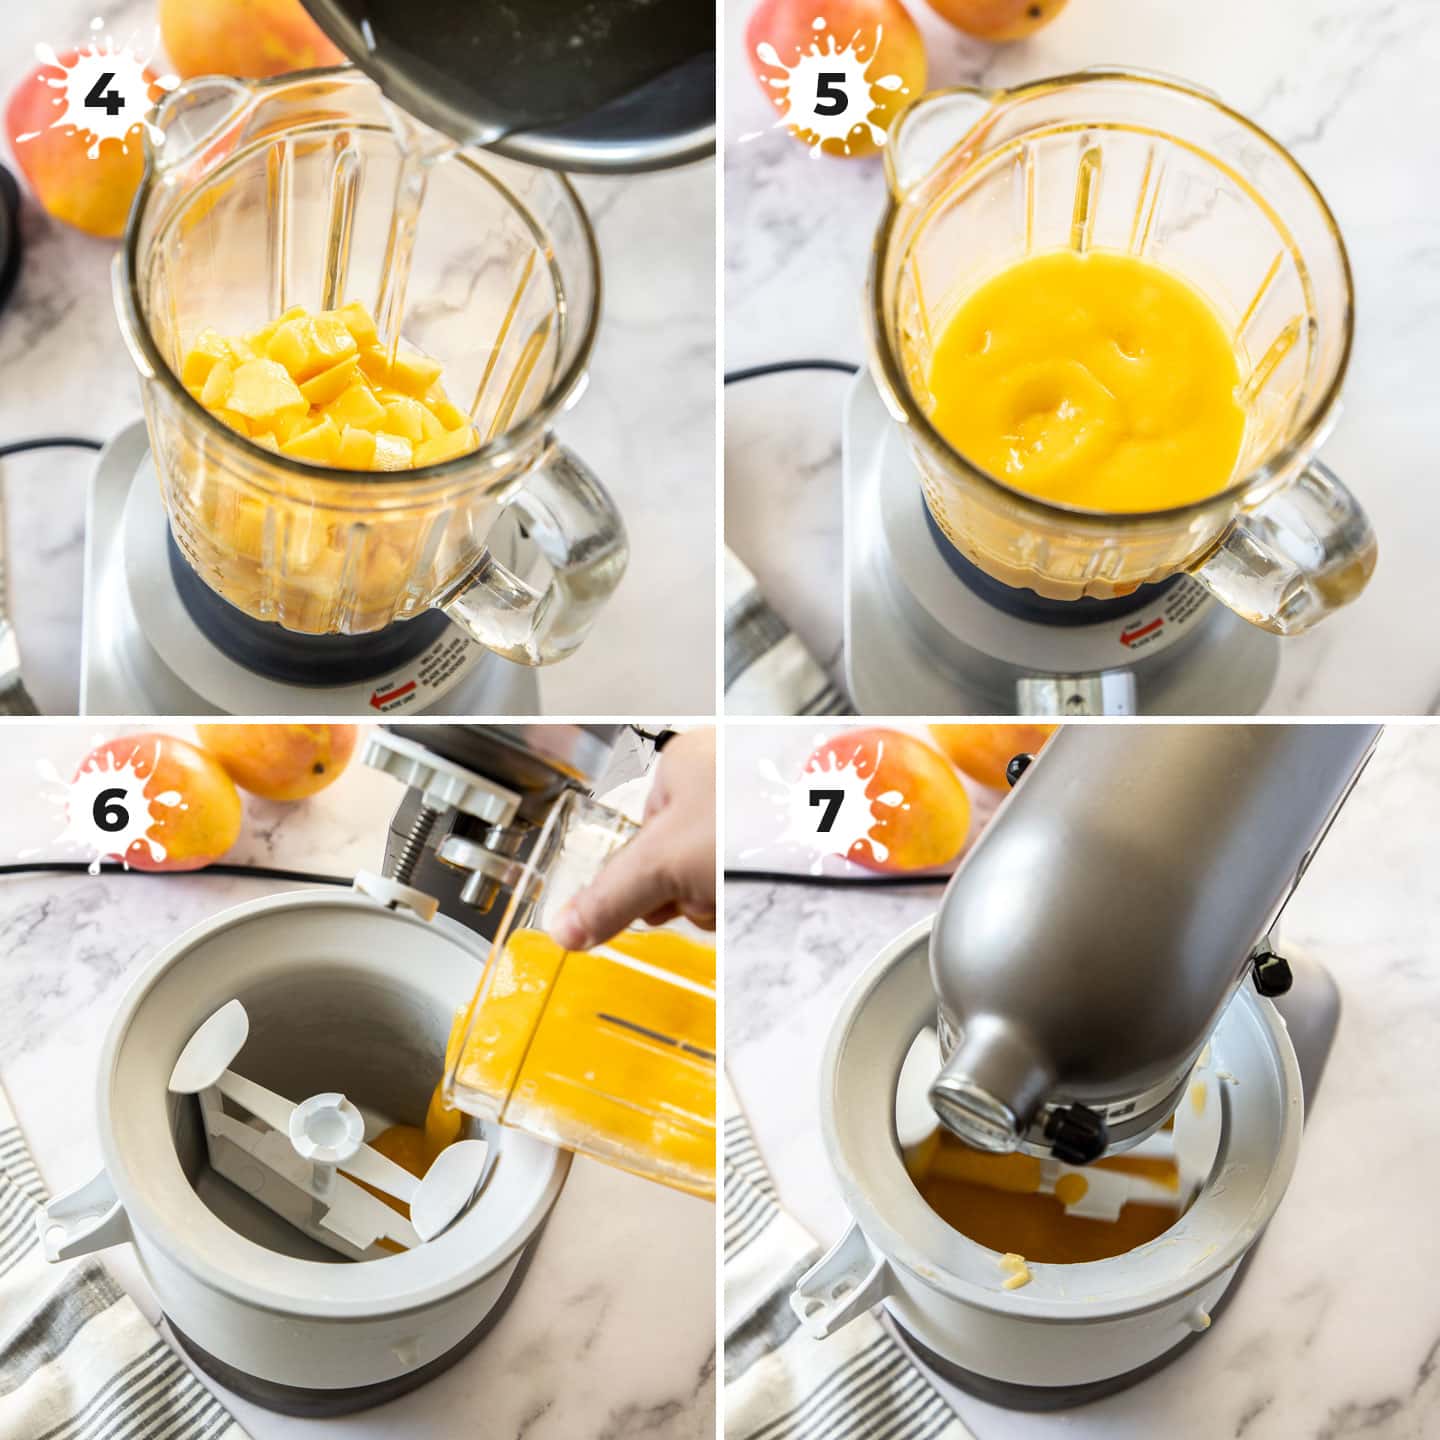 Blending mango puree in a blender, then adding it to an ice cream machine.